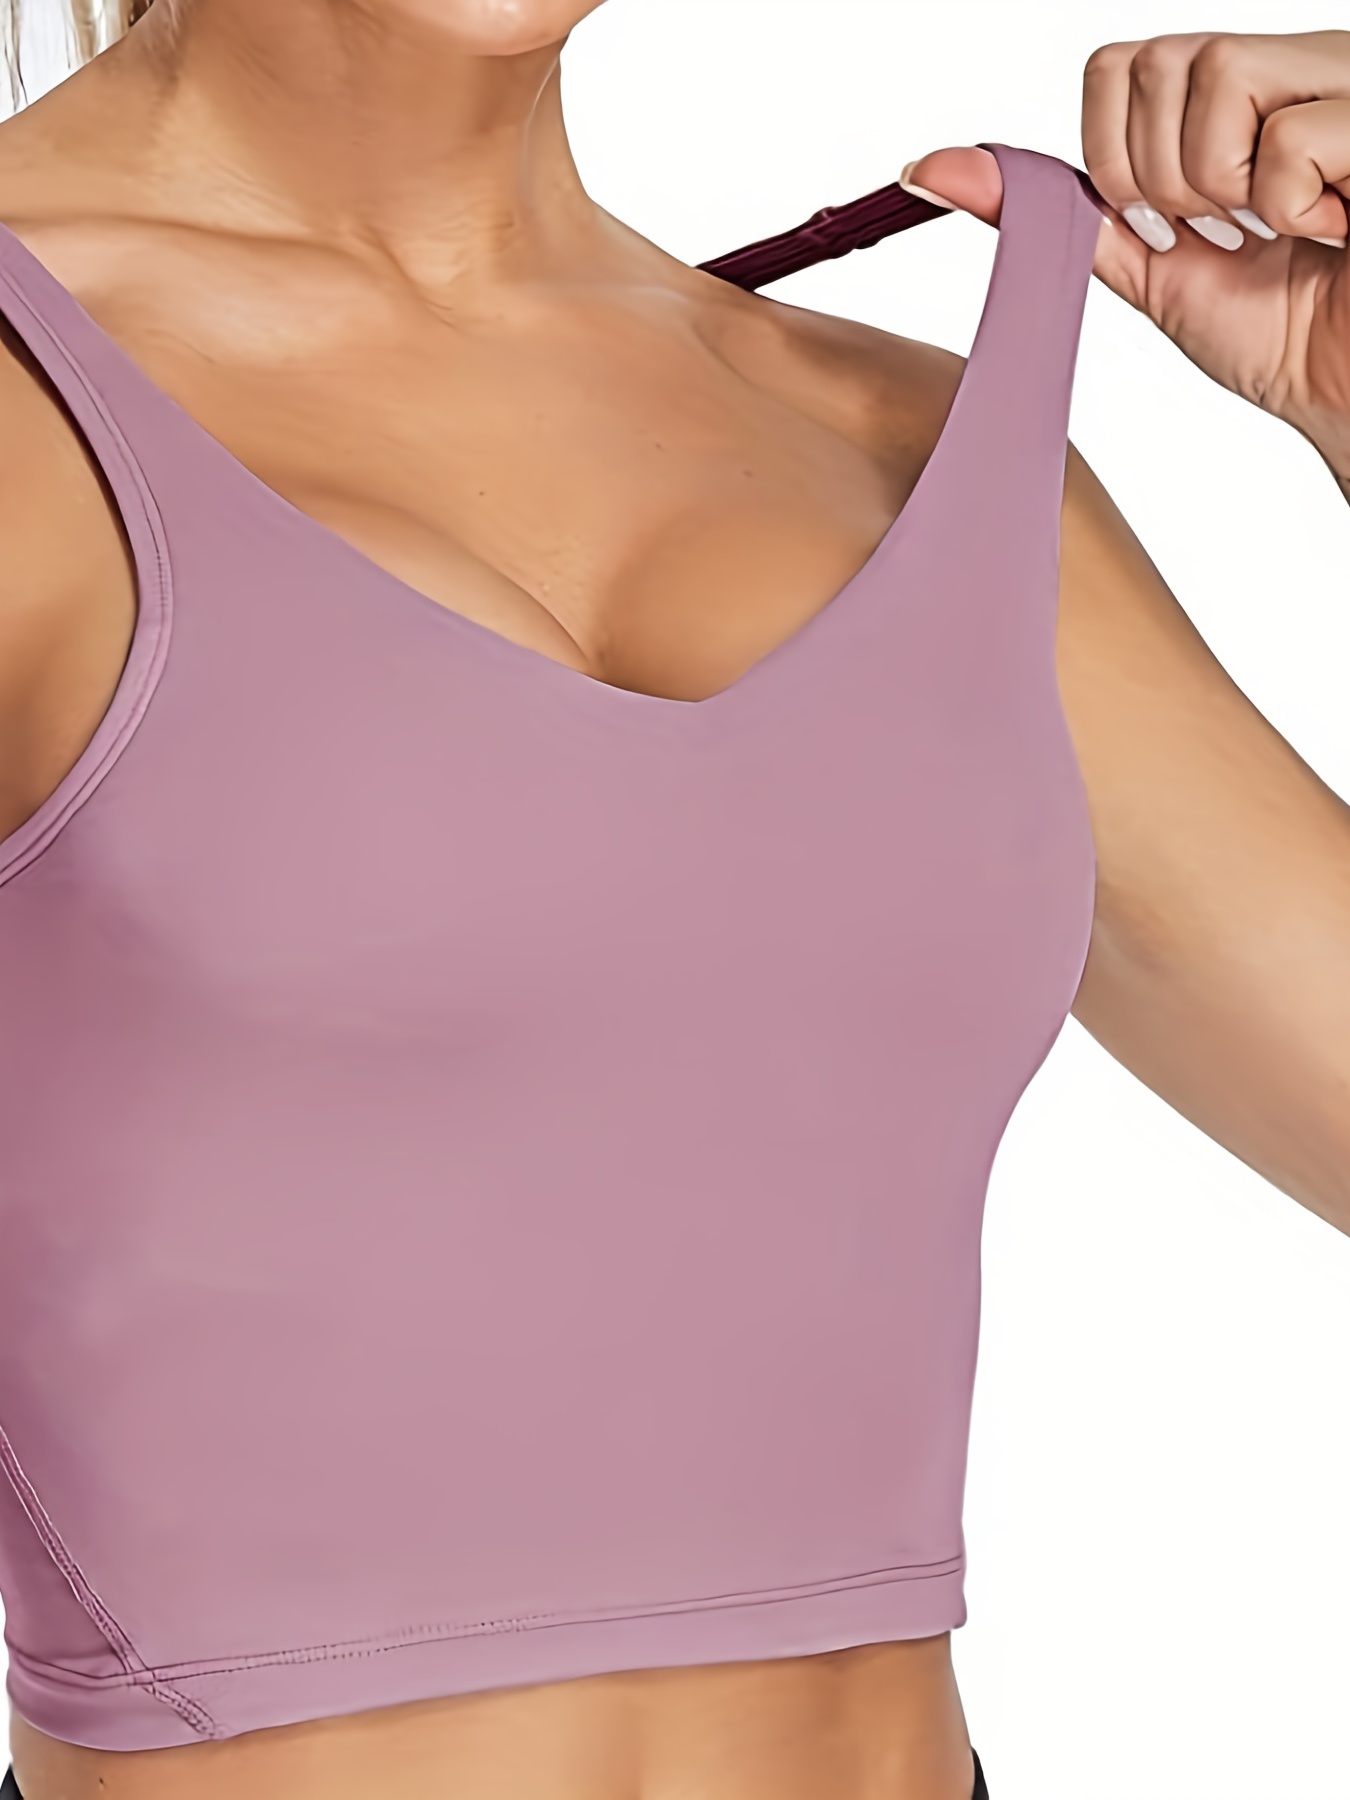 Tomkot Present womens Sports Bra for Women Sports Bras Medium Support Yoga  Bra with Removable Cups Size,Padded,longline design offers the stability